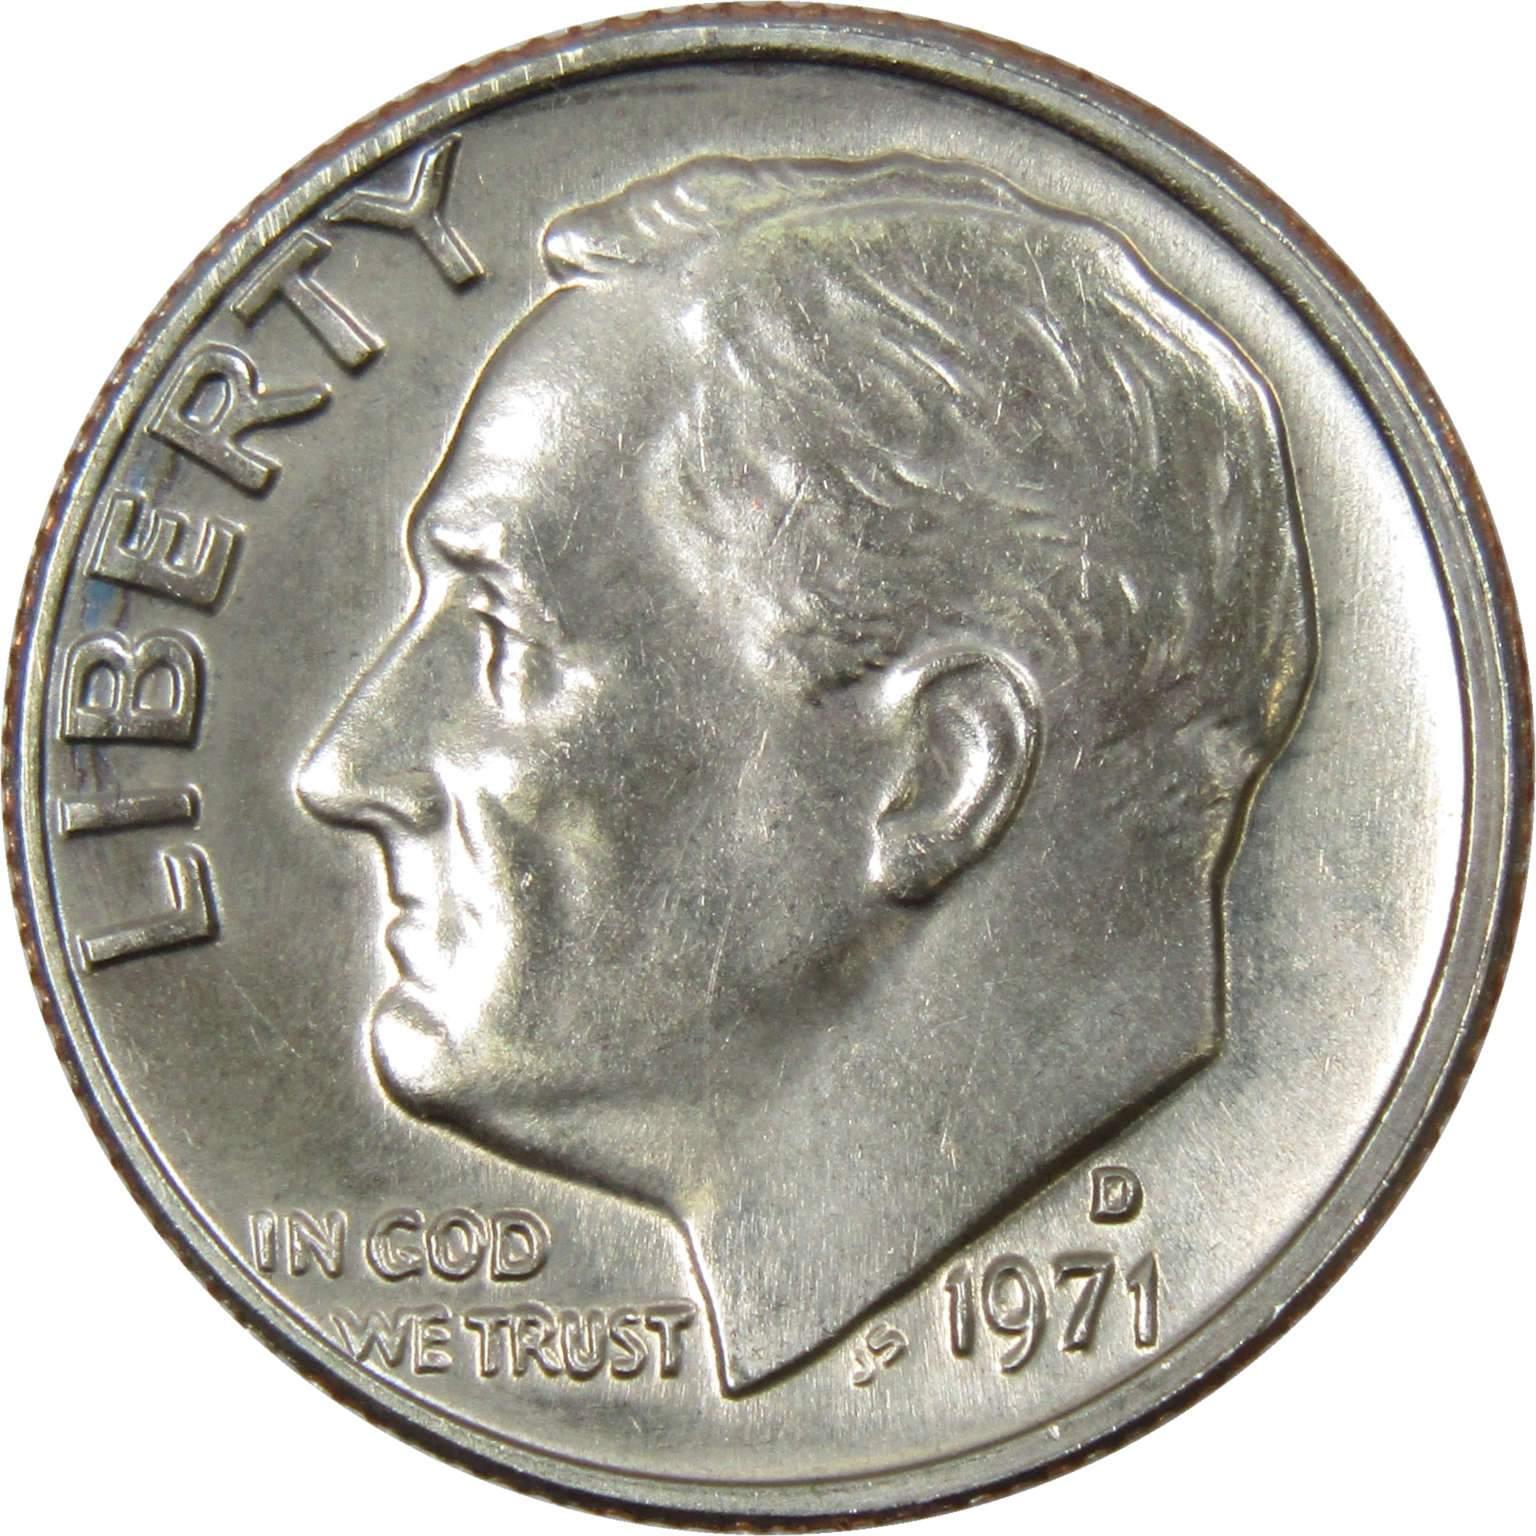 1971 D Roosevelt Dime BU Uncirculated Mint State 10c US Coin Collectible